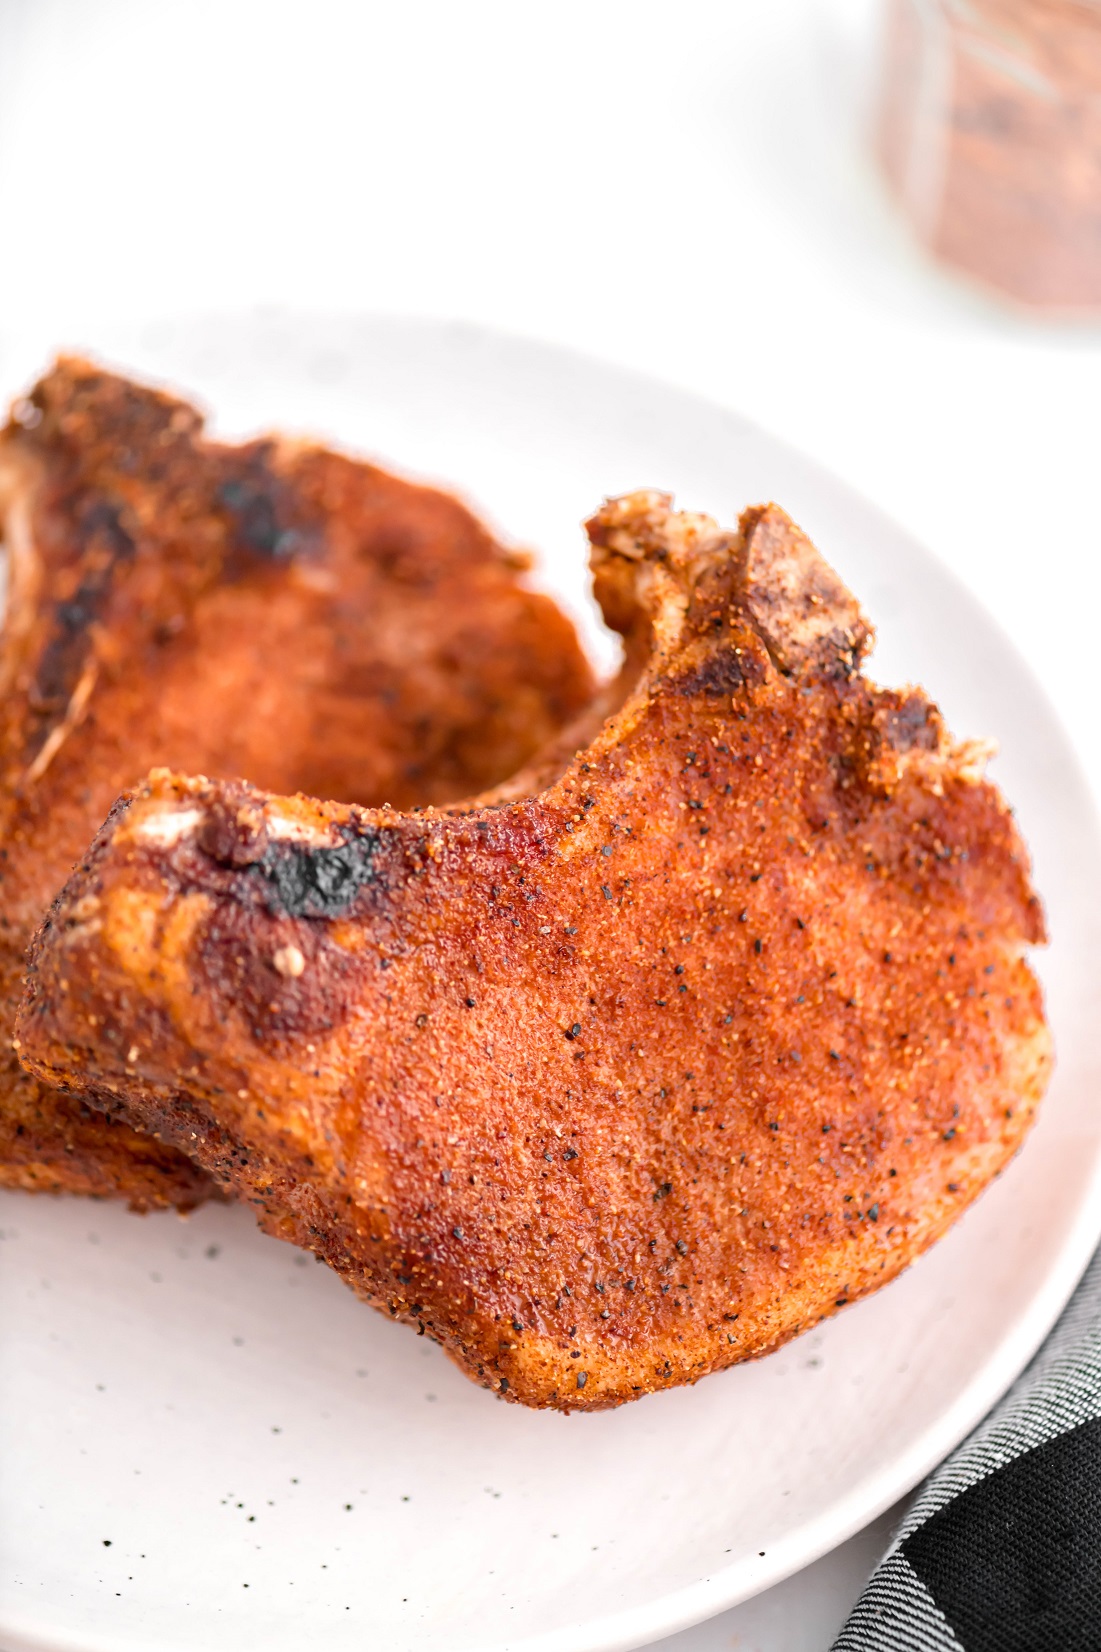 Warm weather means it's time to break out the smoker. These Smoked Pork Chops are super simple to make and done in less than 2 hours.